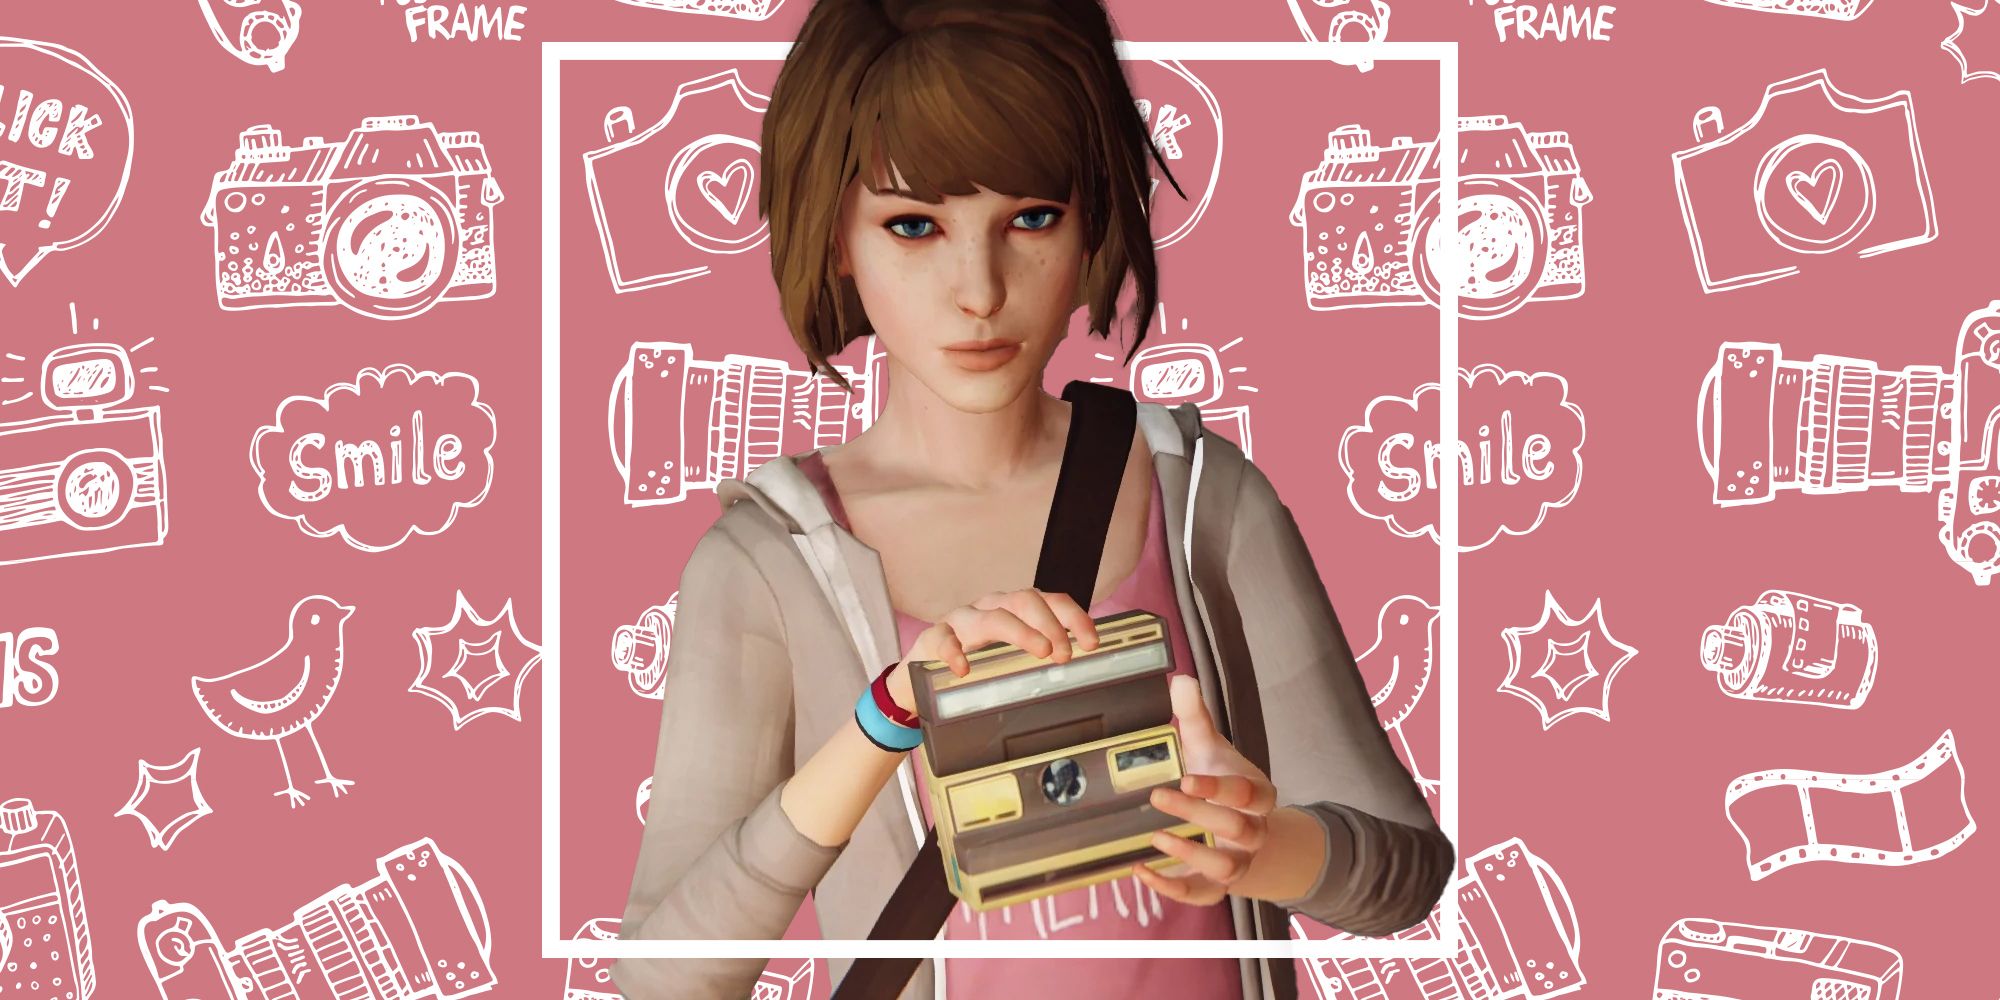 Max Caulfield from Life is Strange with a camera